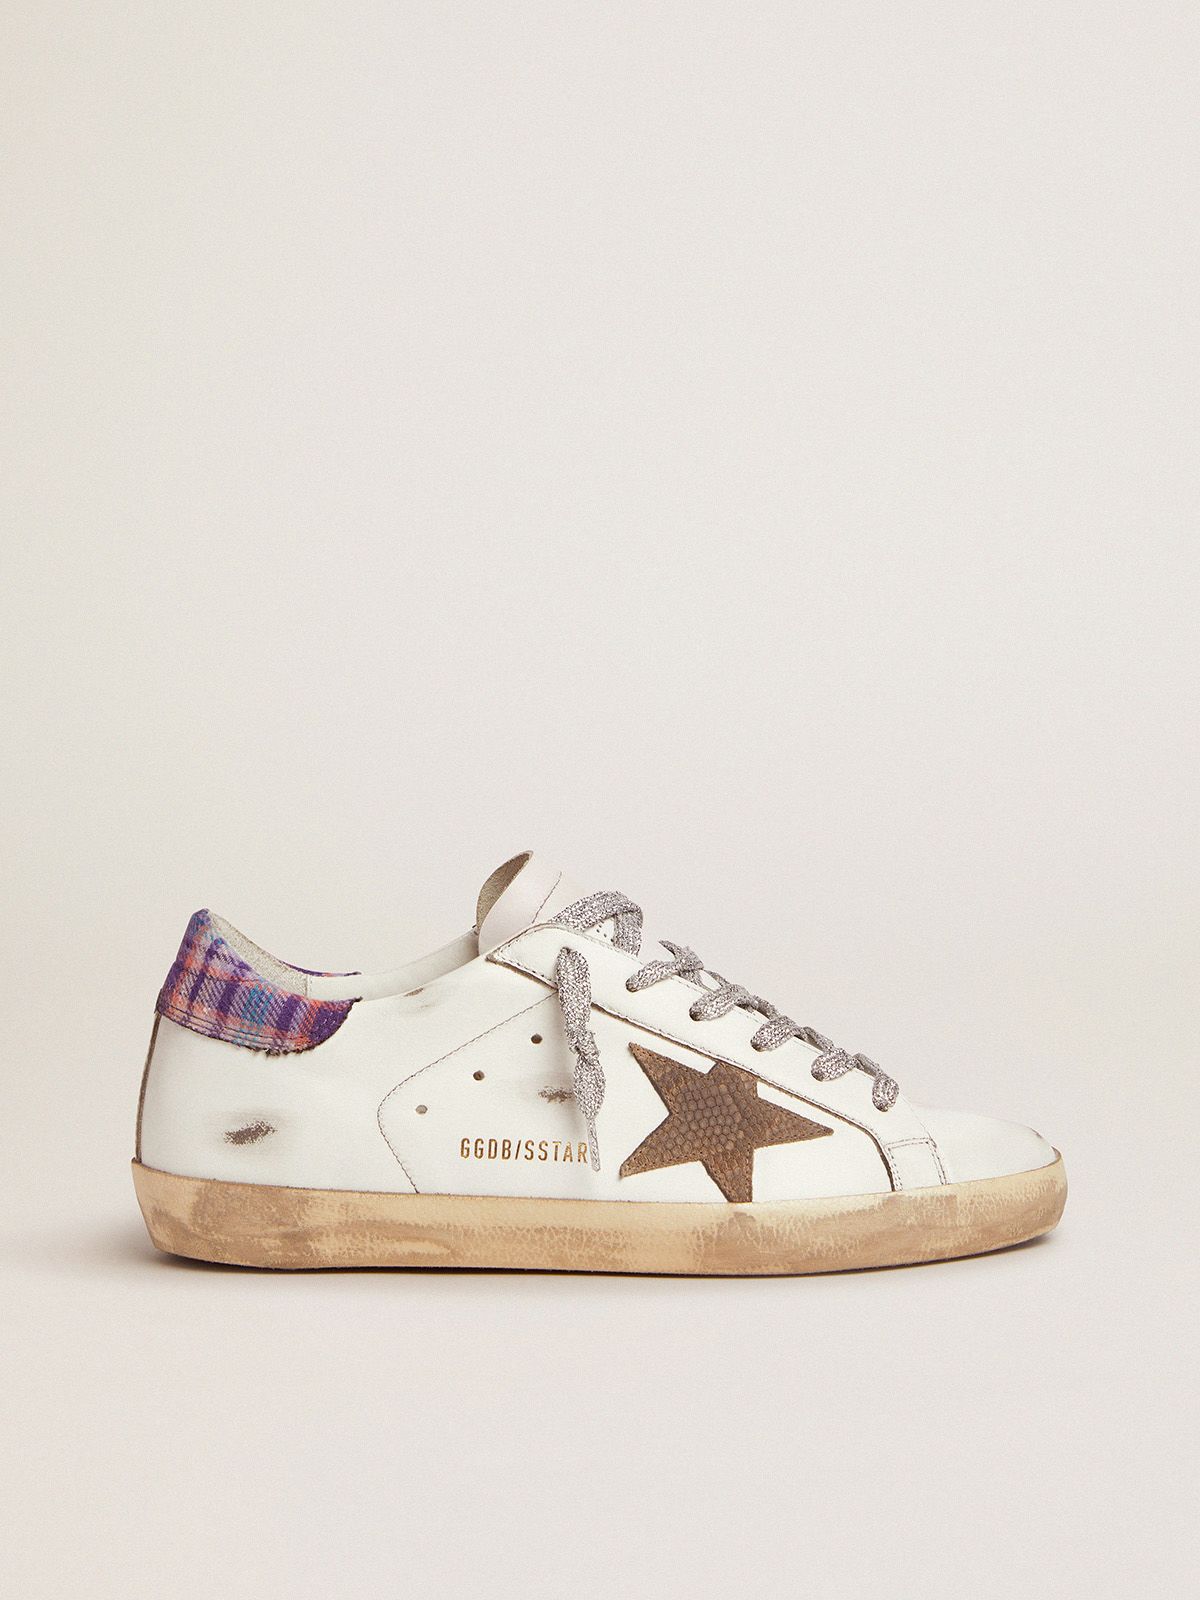 Super-Star sneakers with colored jacquard heel tab and snake-print suede star